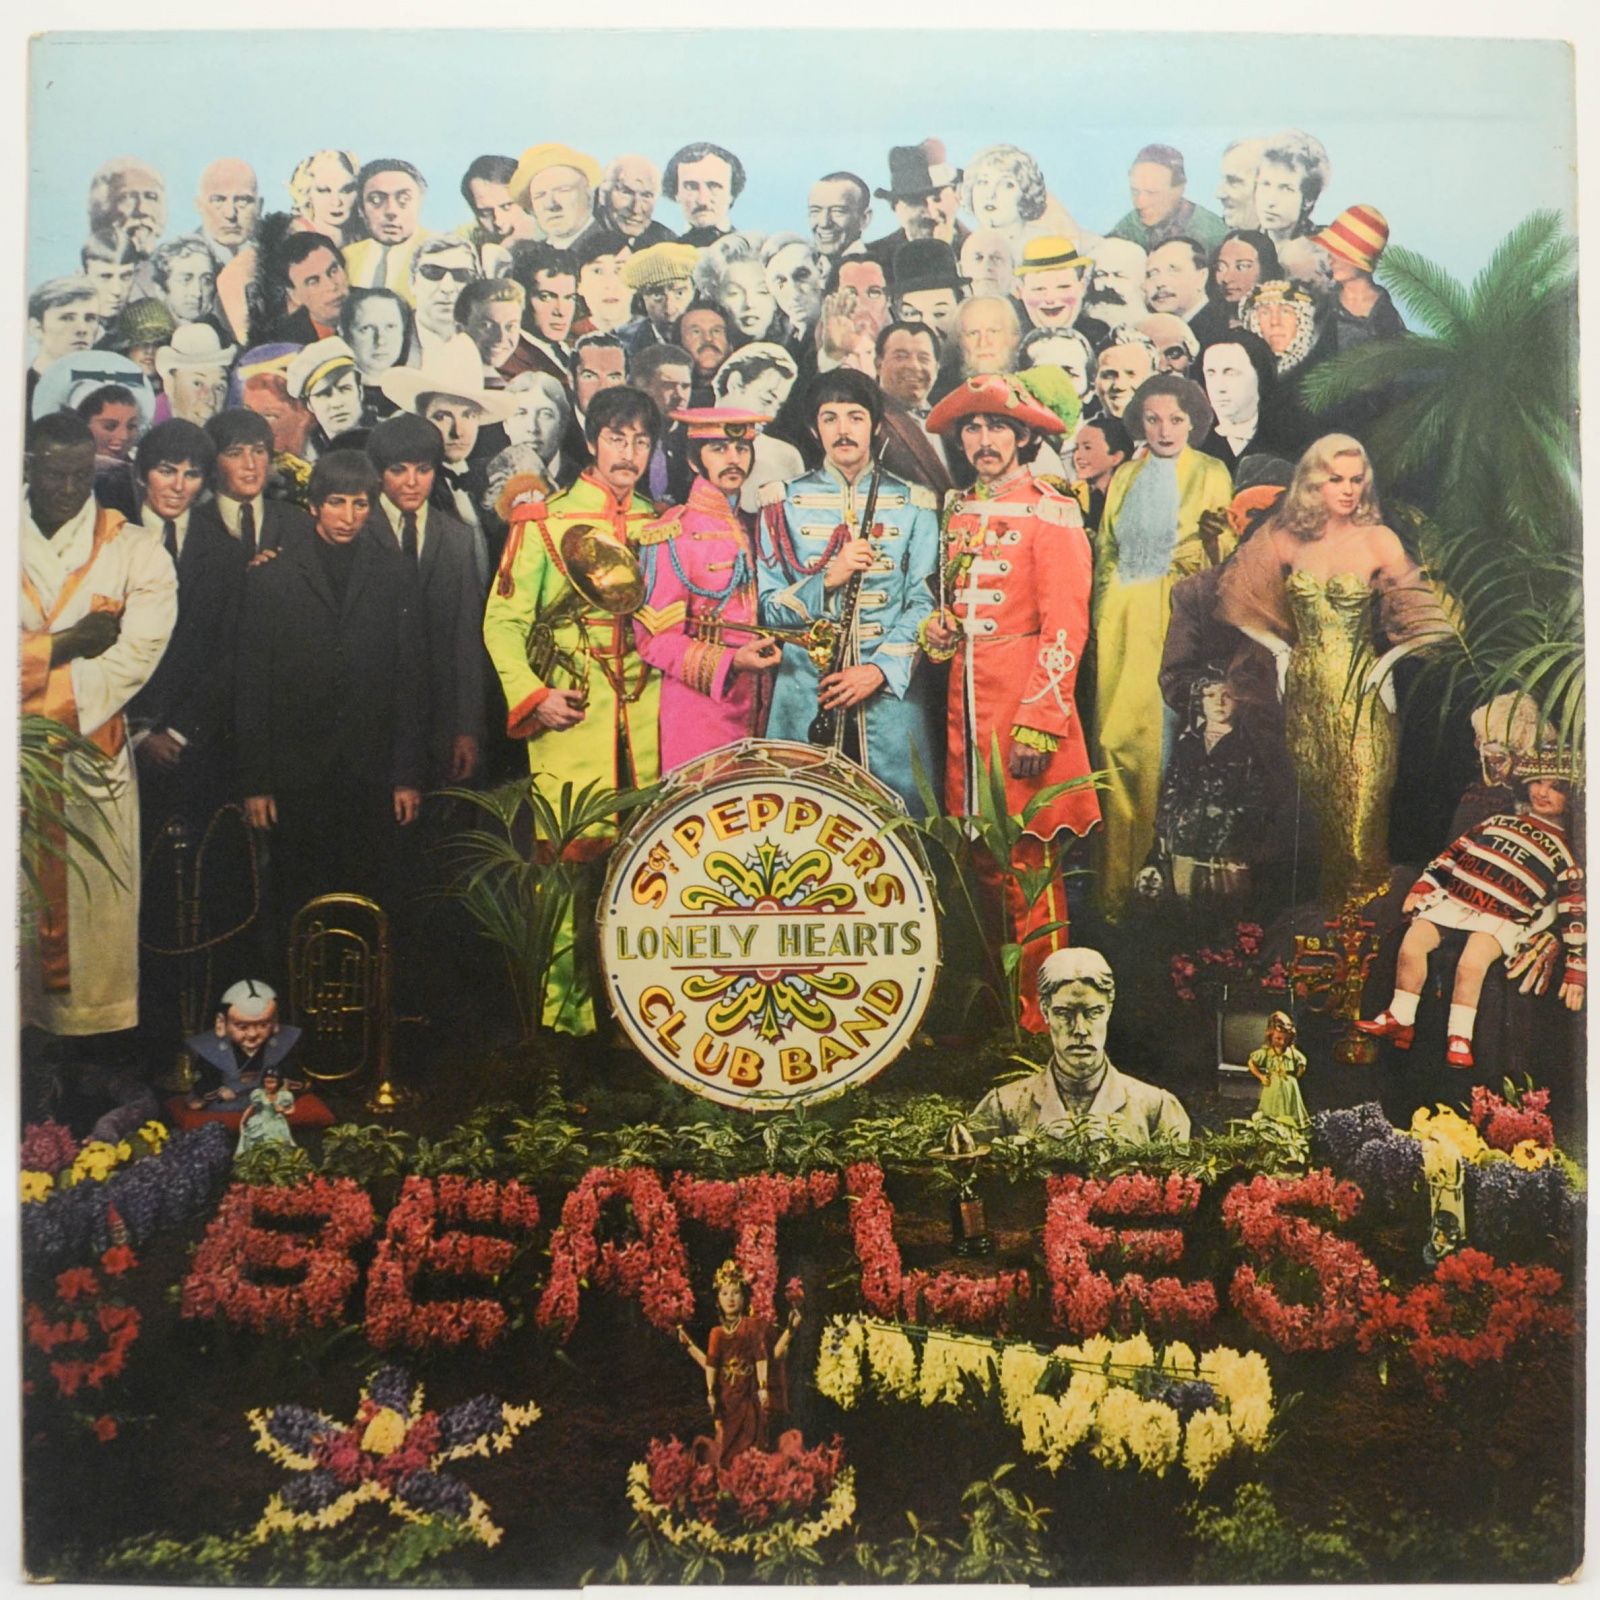 Sgt. Pepper's Lonely Hearts Club Band, 1967